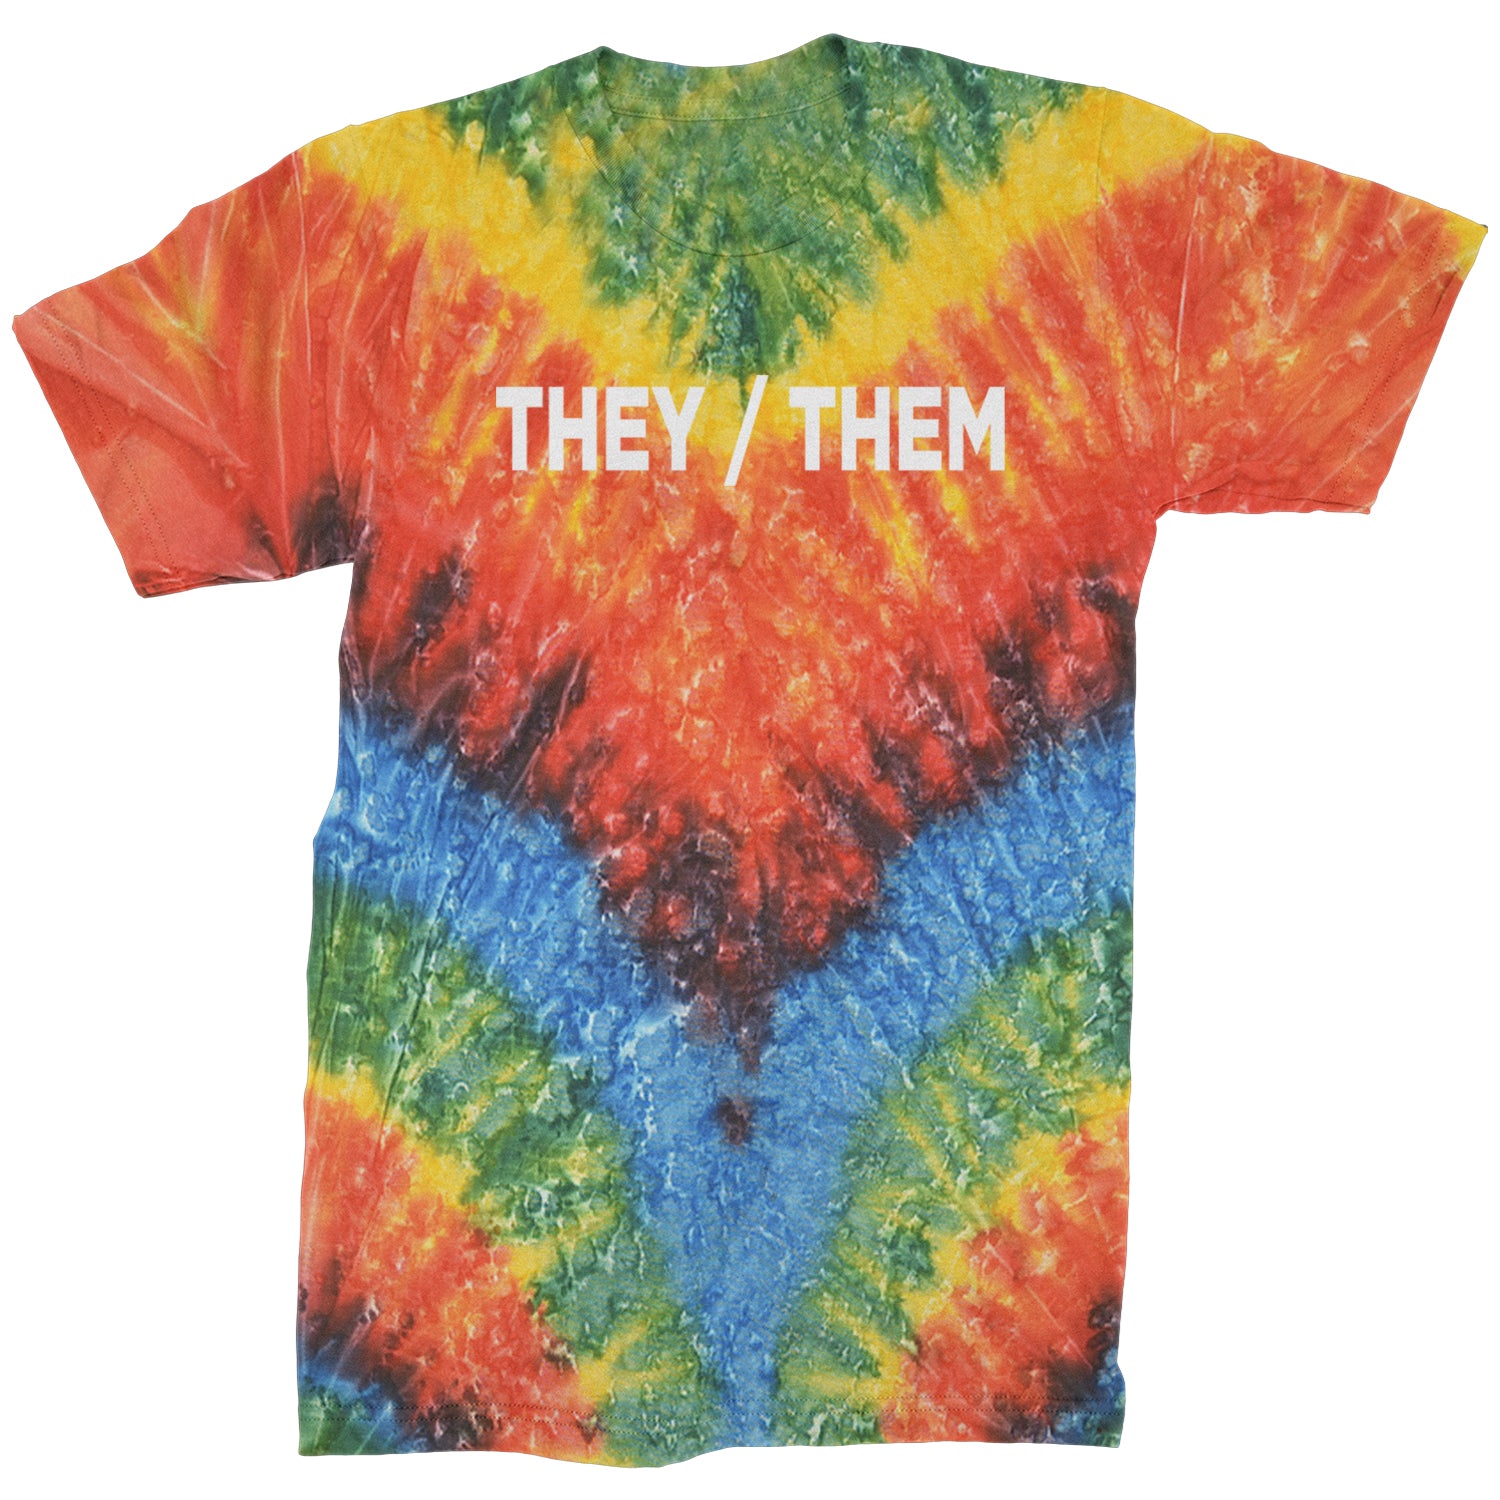 They Them Gender Pronouns Diversity and Inclusion Mens T-shirt binary, civil, gay, he, her, him, nonbinary, pride, rights, she, them, they by Expression Tees